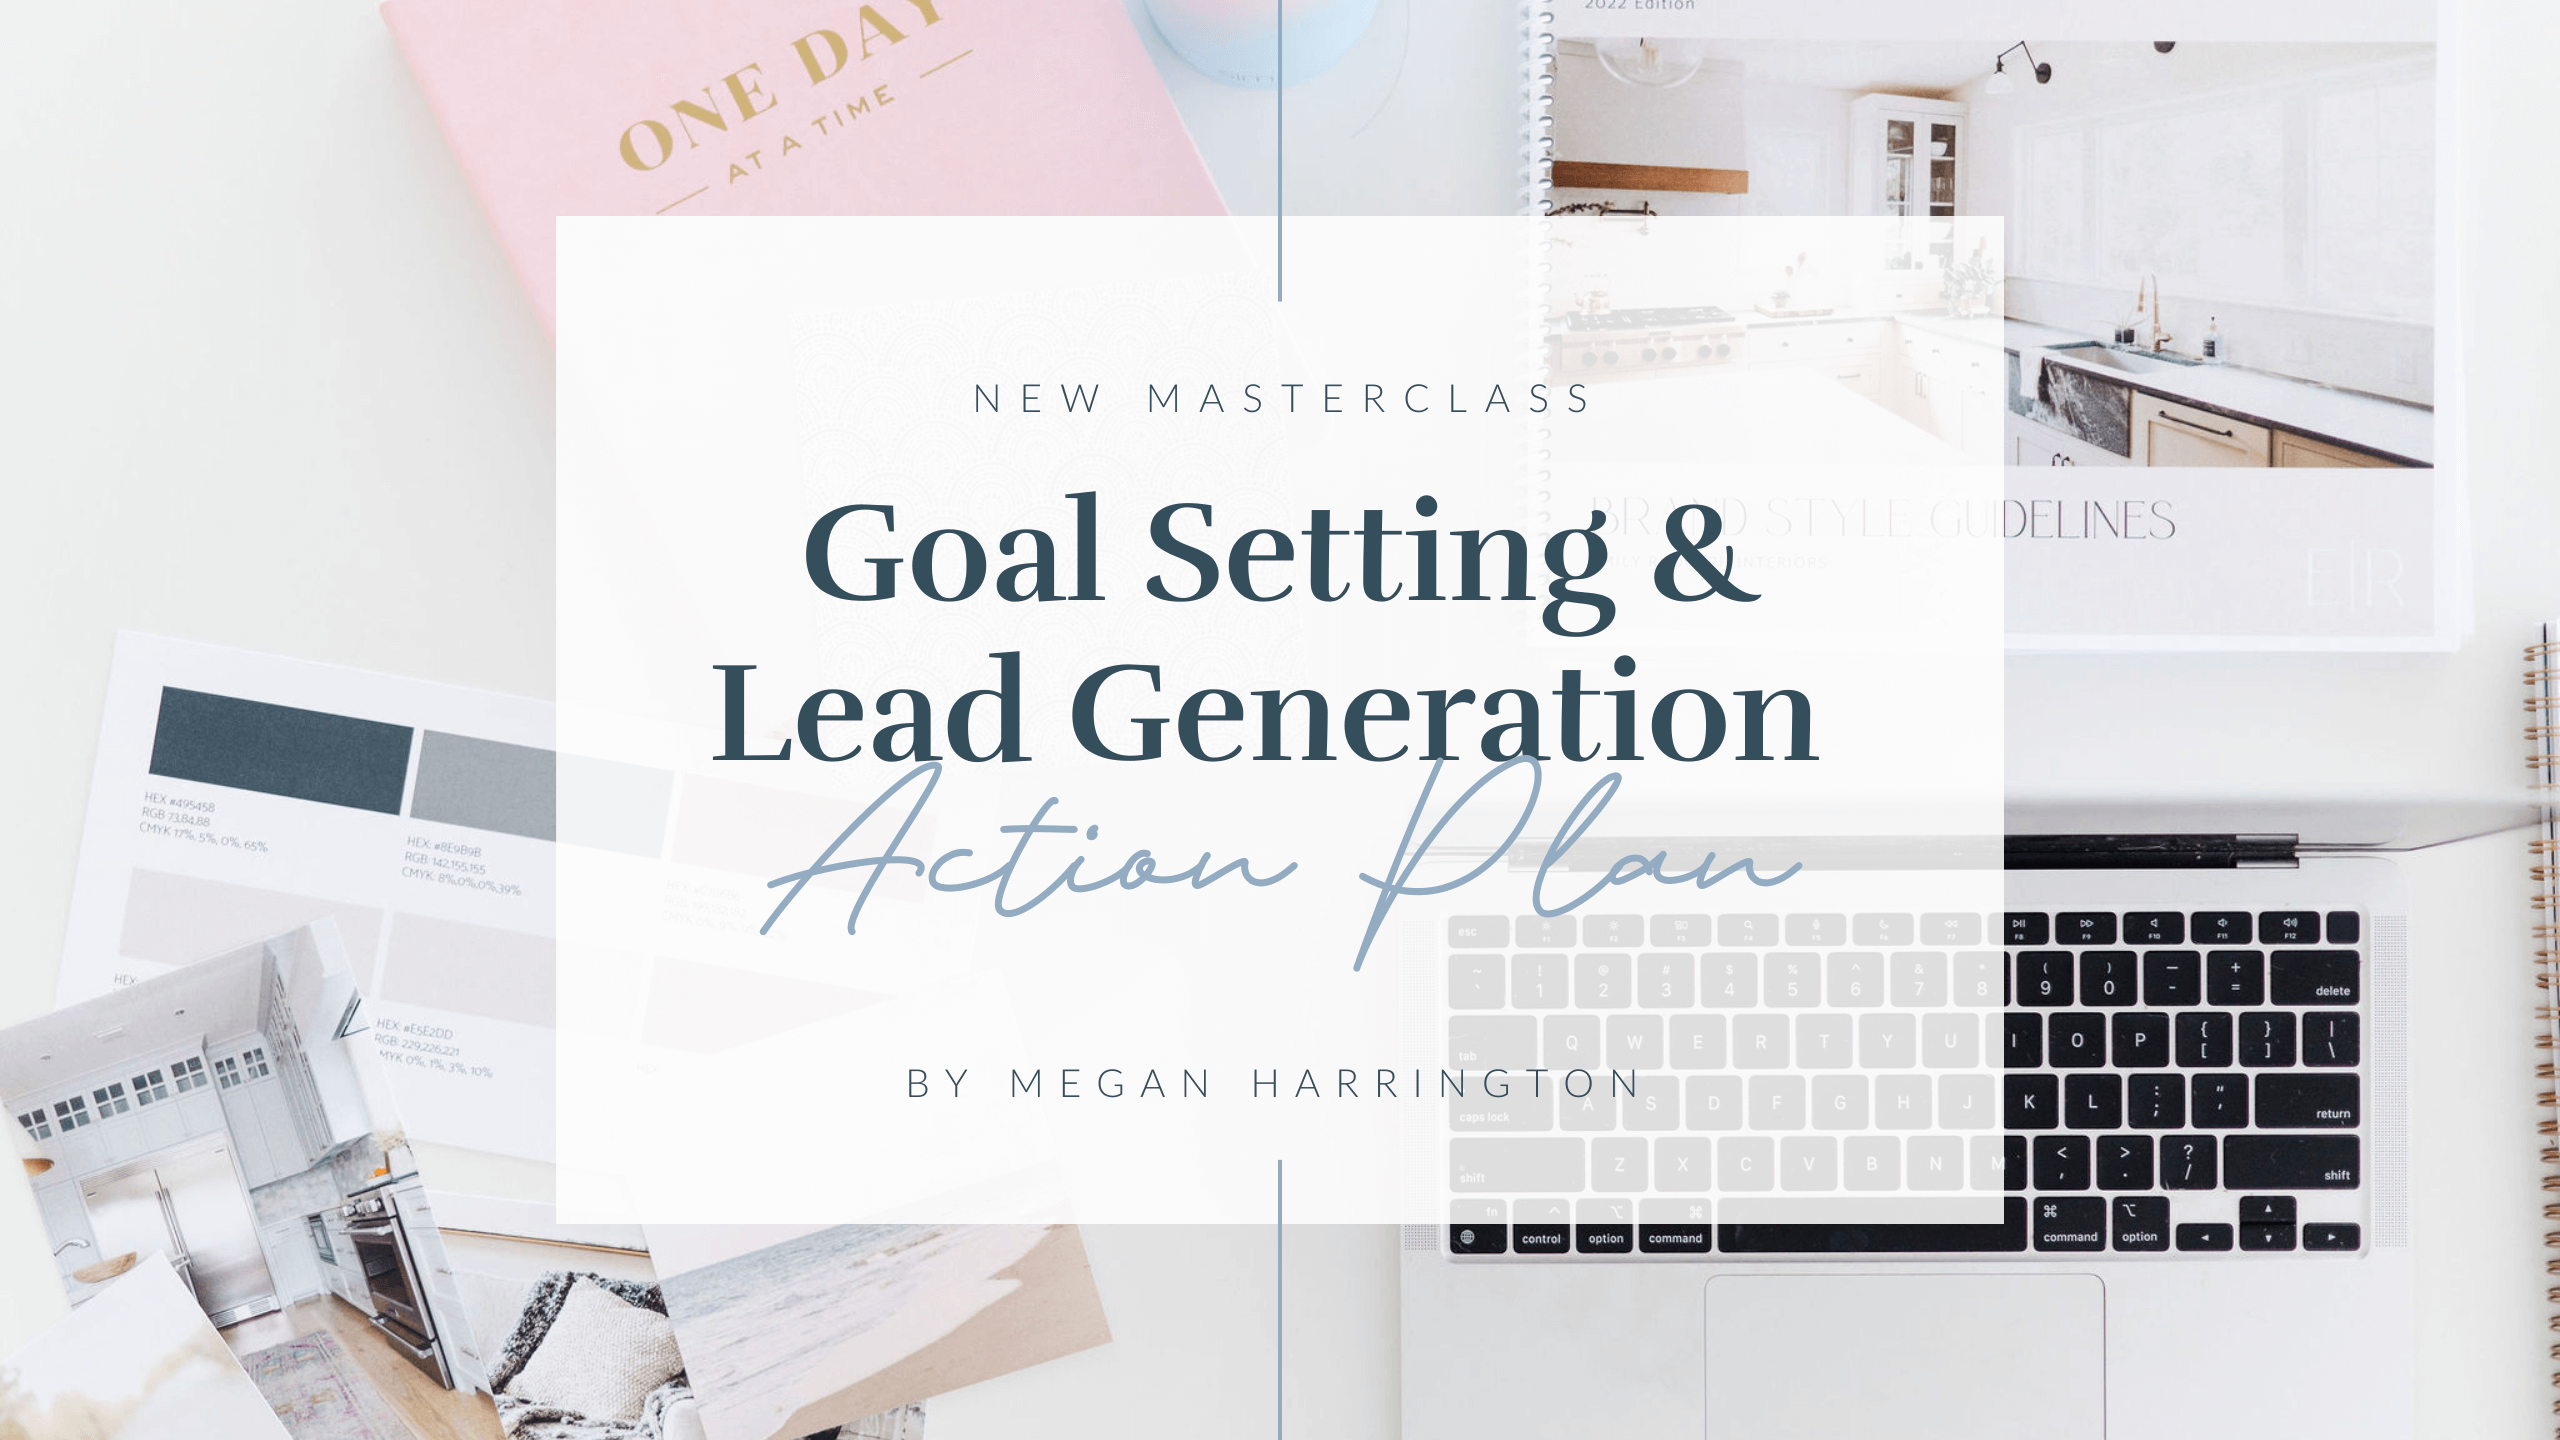 Steal the Lead Generation Plan that Scaled My Biz